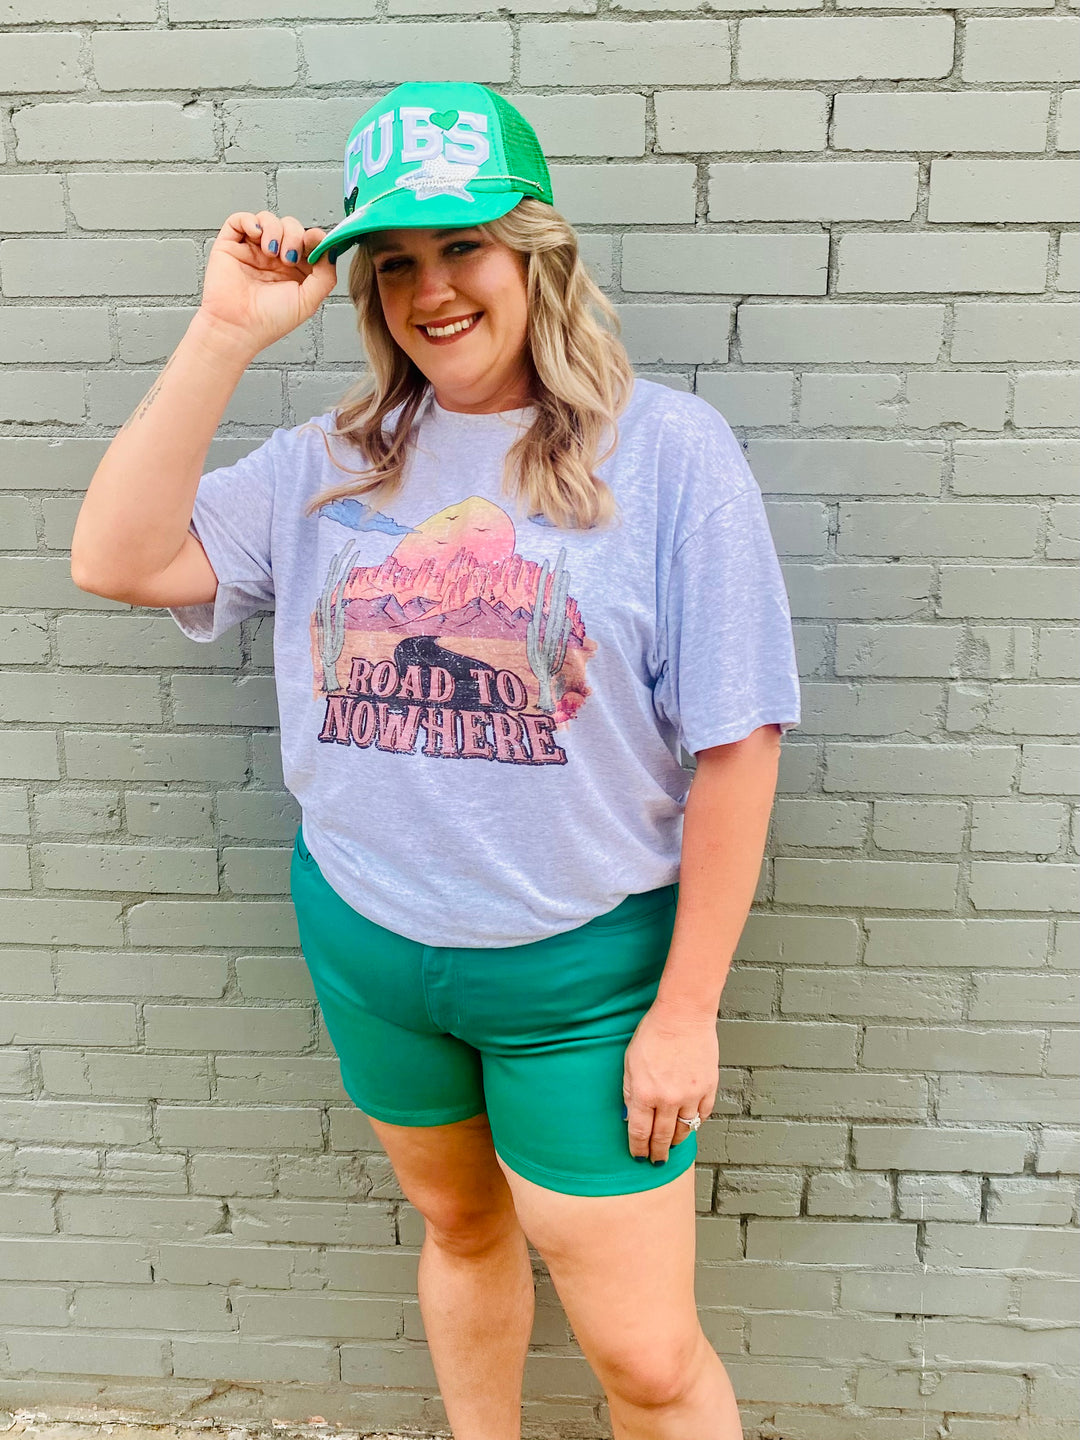 Kelsey Shorts - Green-Bottoms and Jeans-Anatomy Clothing Boutique in Brenham, Texas